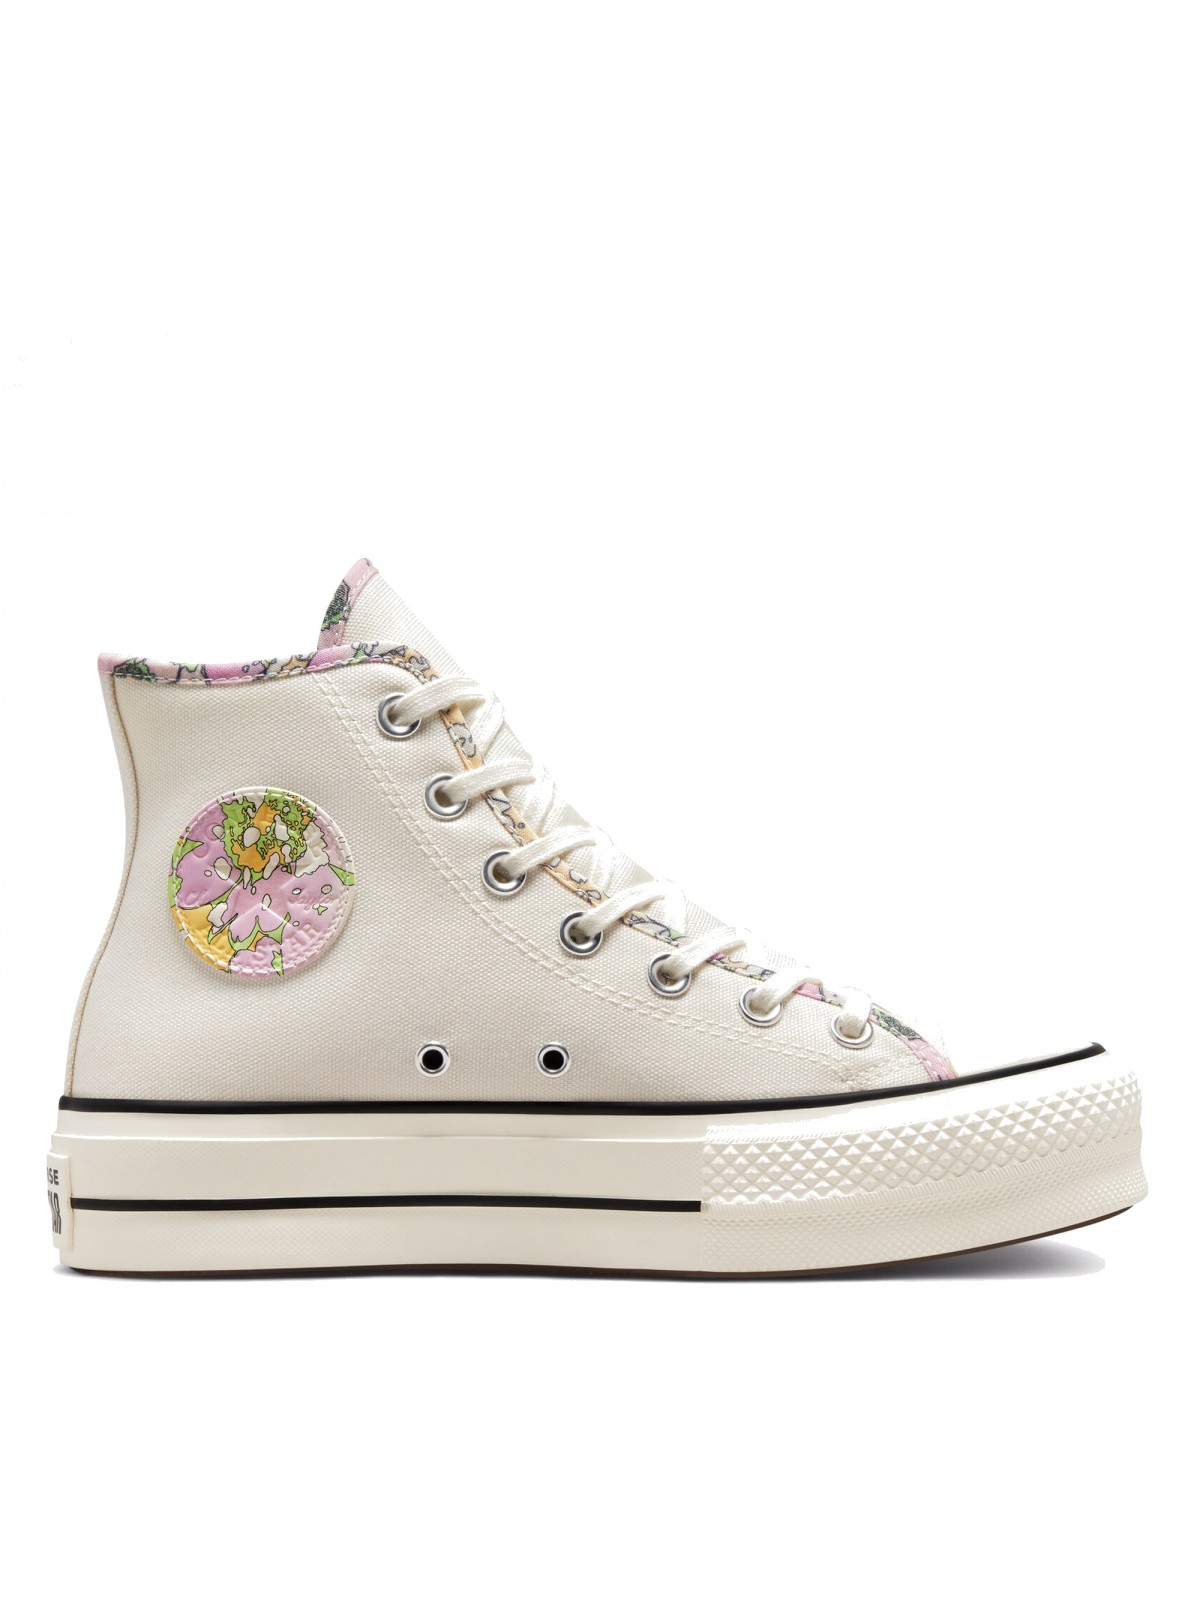 Converse Chuck Taylor all star Lift plateforme Crafted Florals